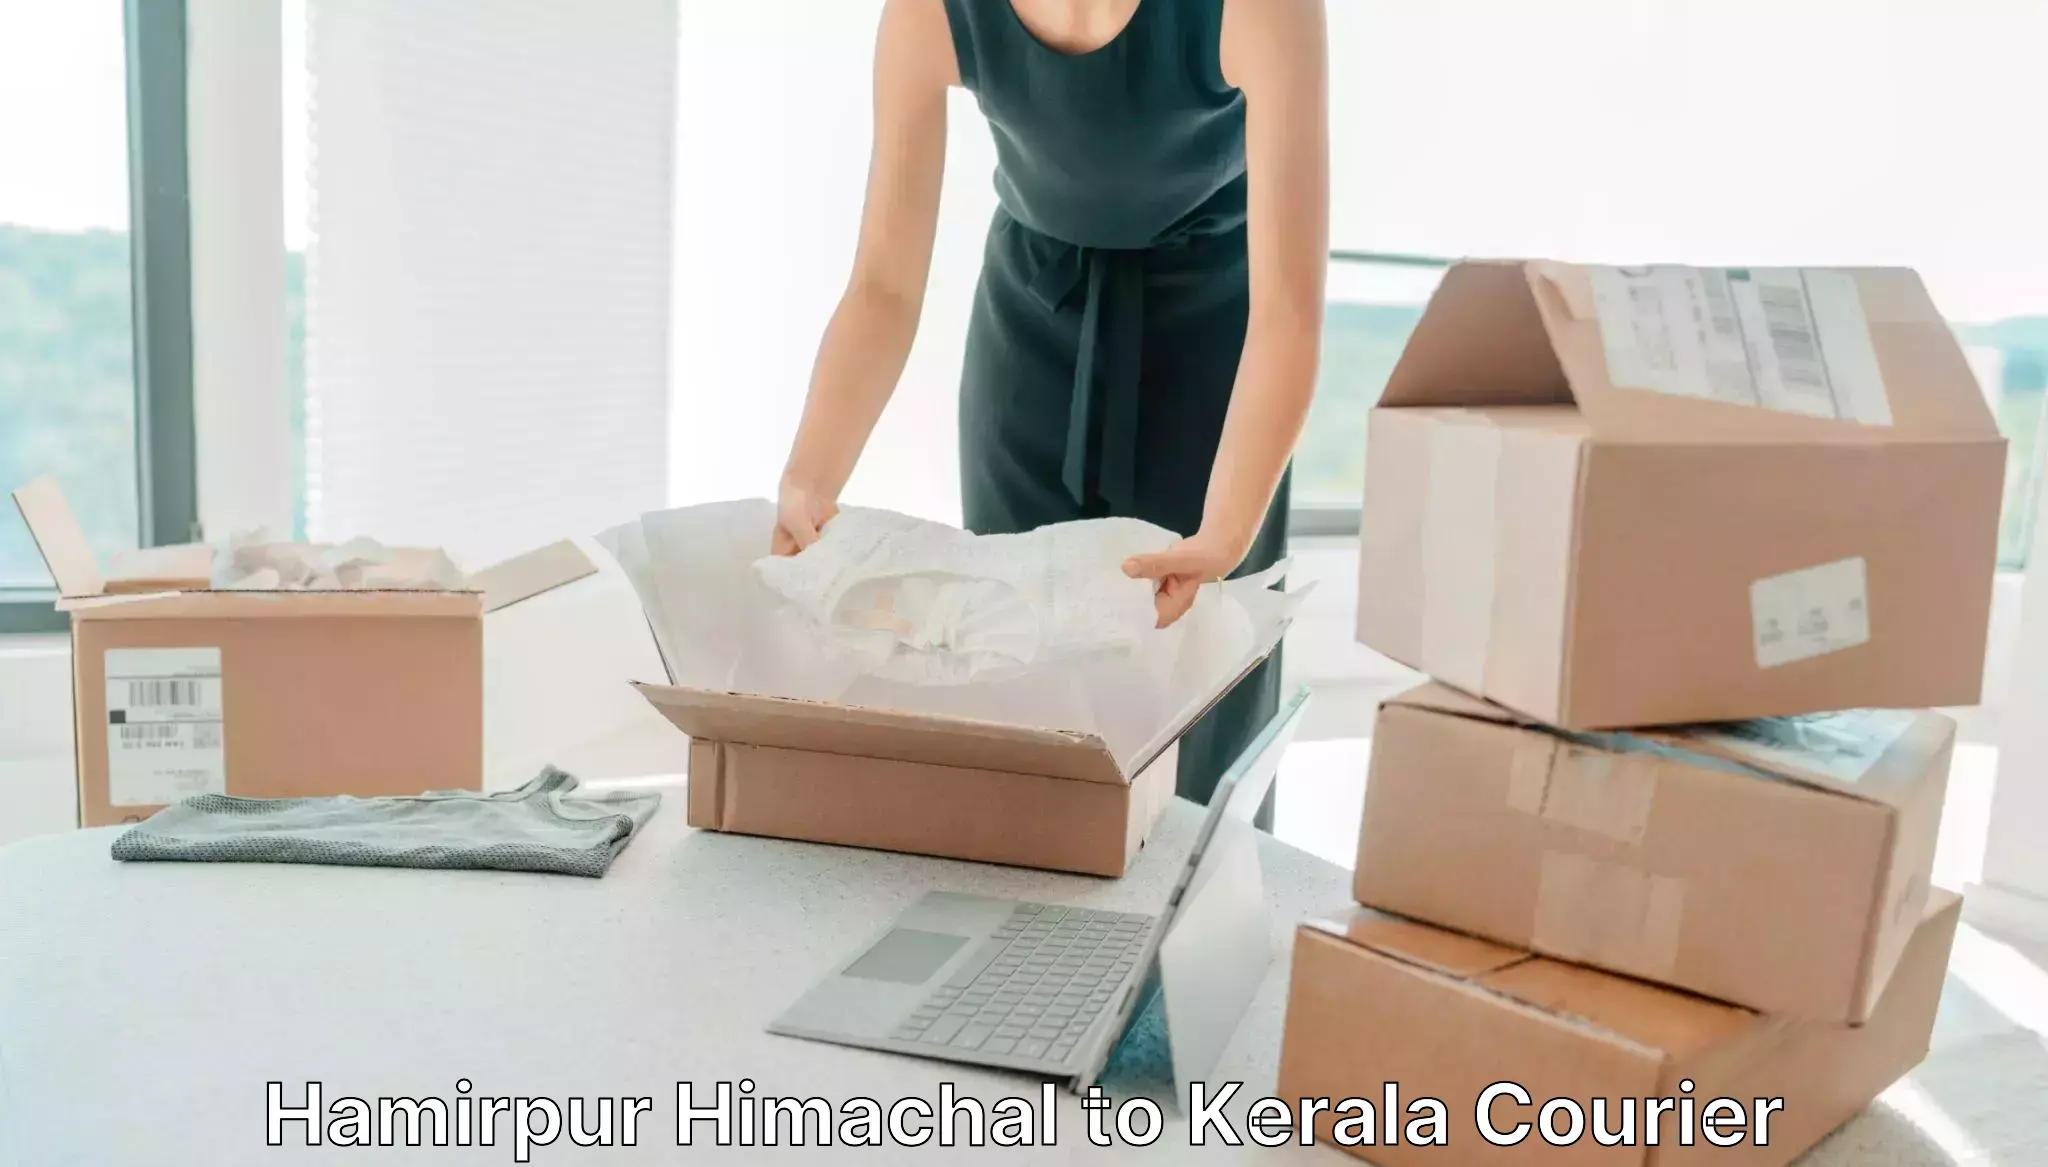 International courier networks Hamirpur Himachal to Kerala